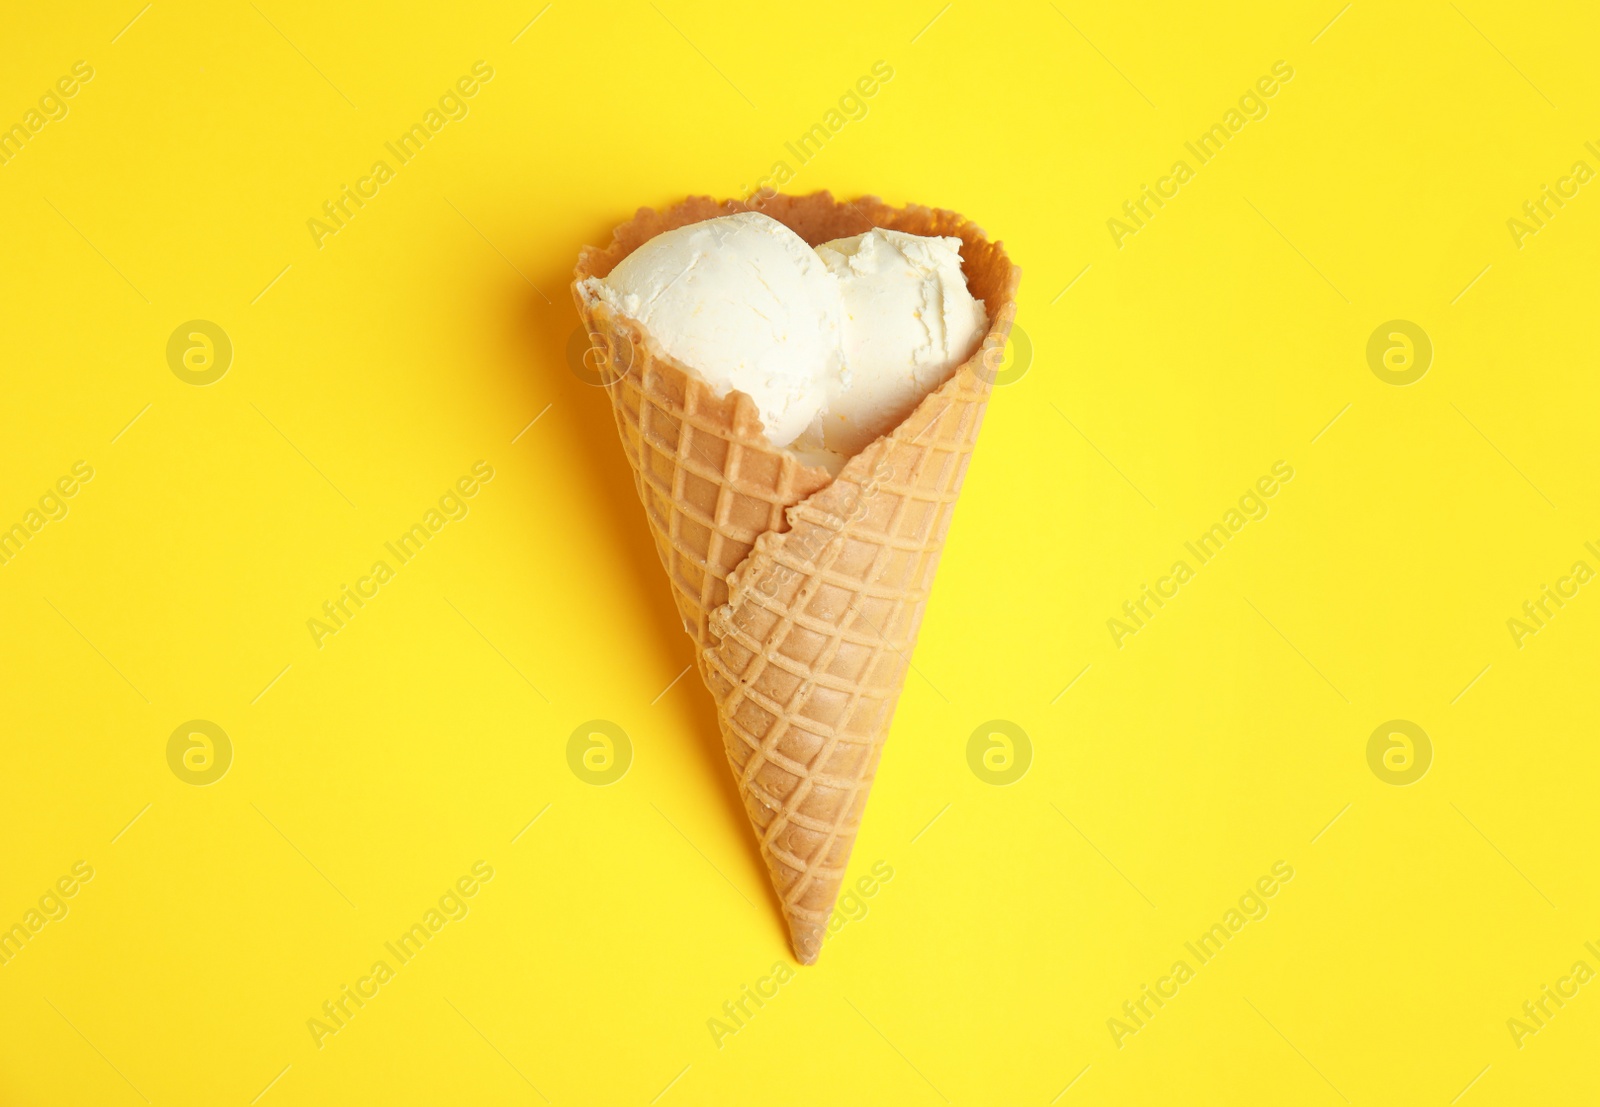 Photo of Delicious vanilla ice cream in wafer cone on yellow background, top view